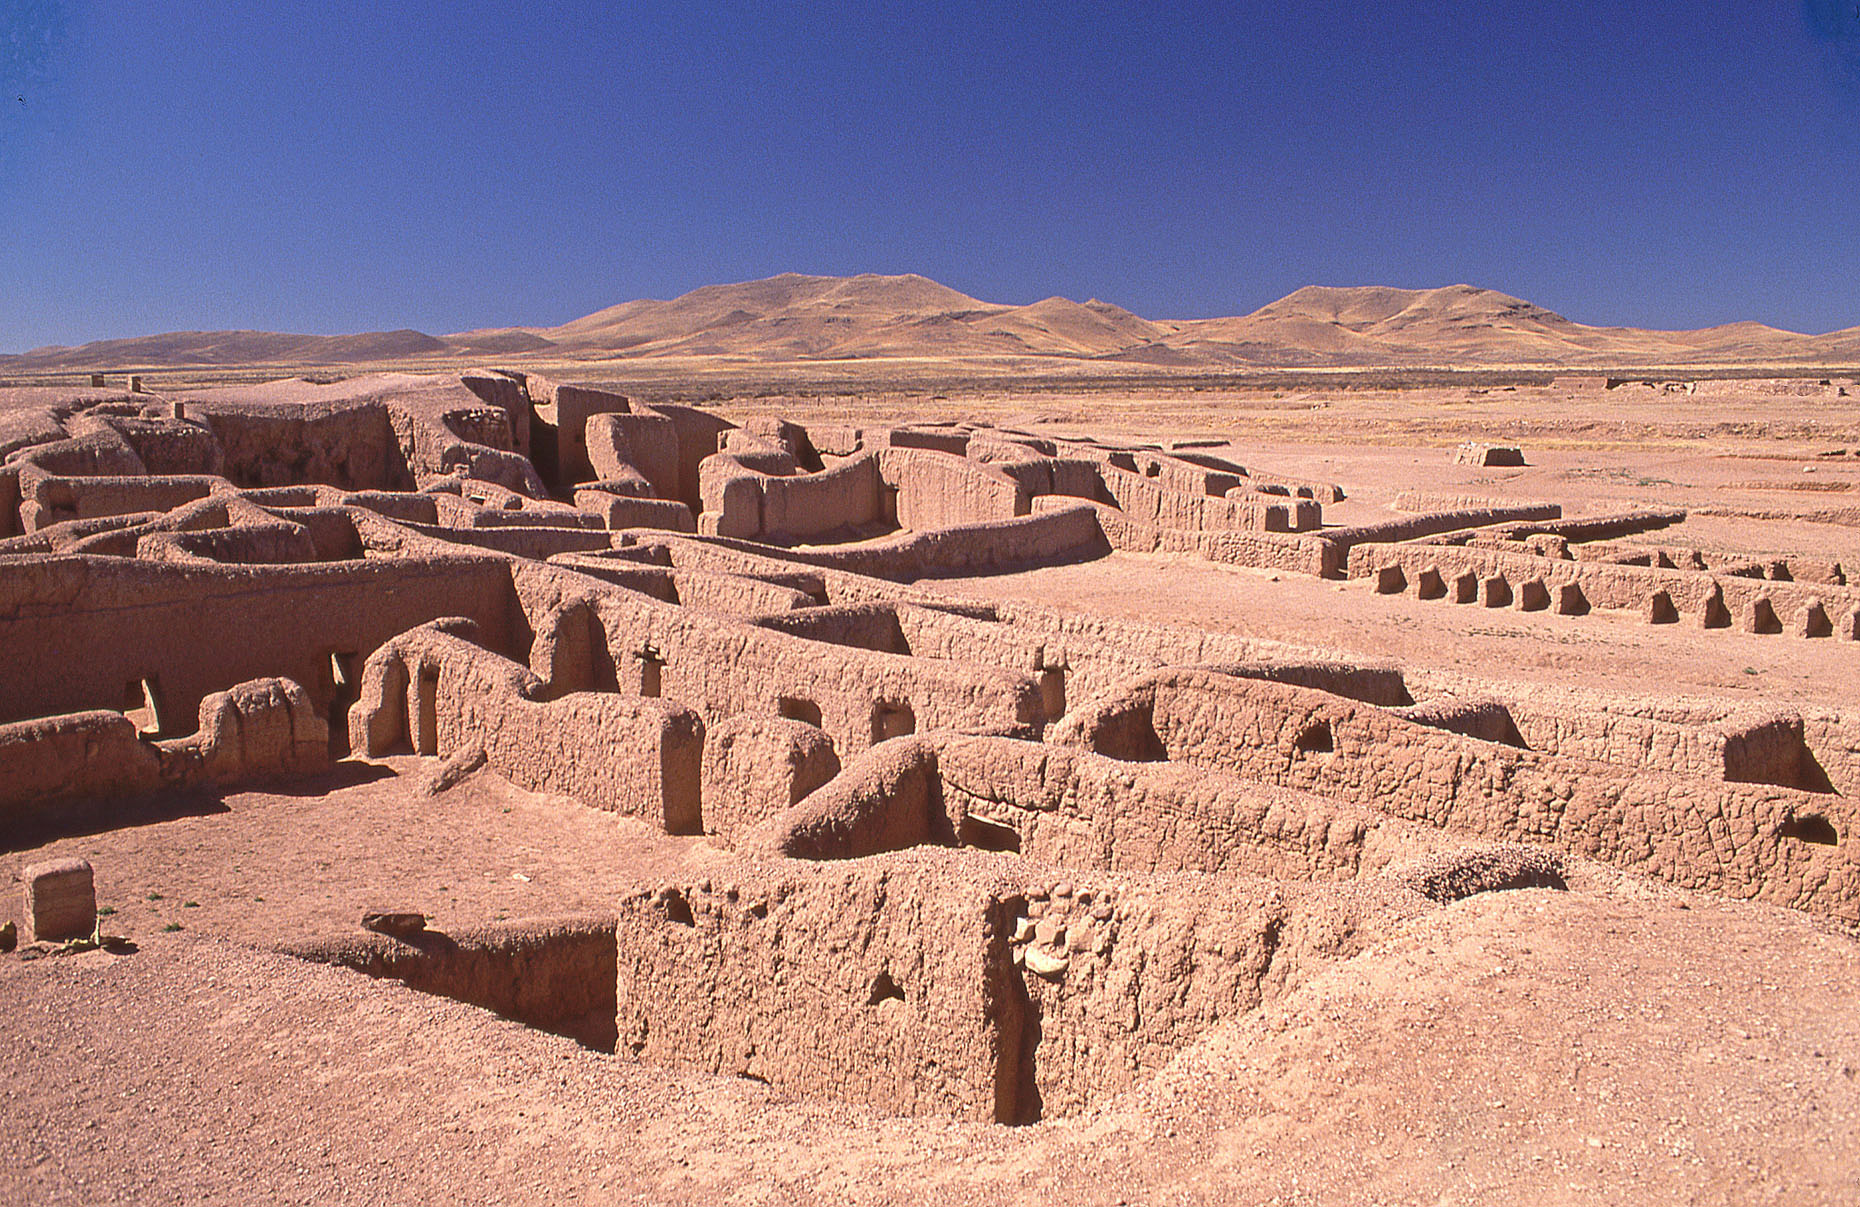 Casas Grandes, John Annerino, Paquime Archaeological Zone, Chihuahua, Mexico, UNESCO World Heritage Site, Chaco Meridian